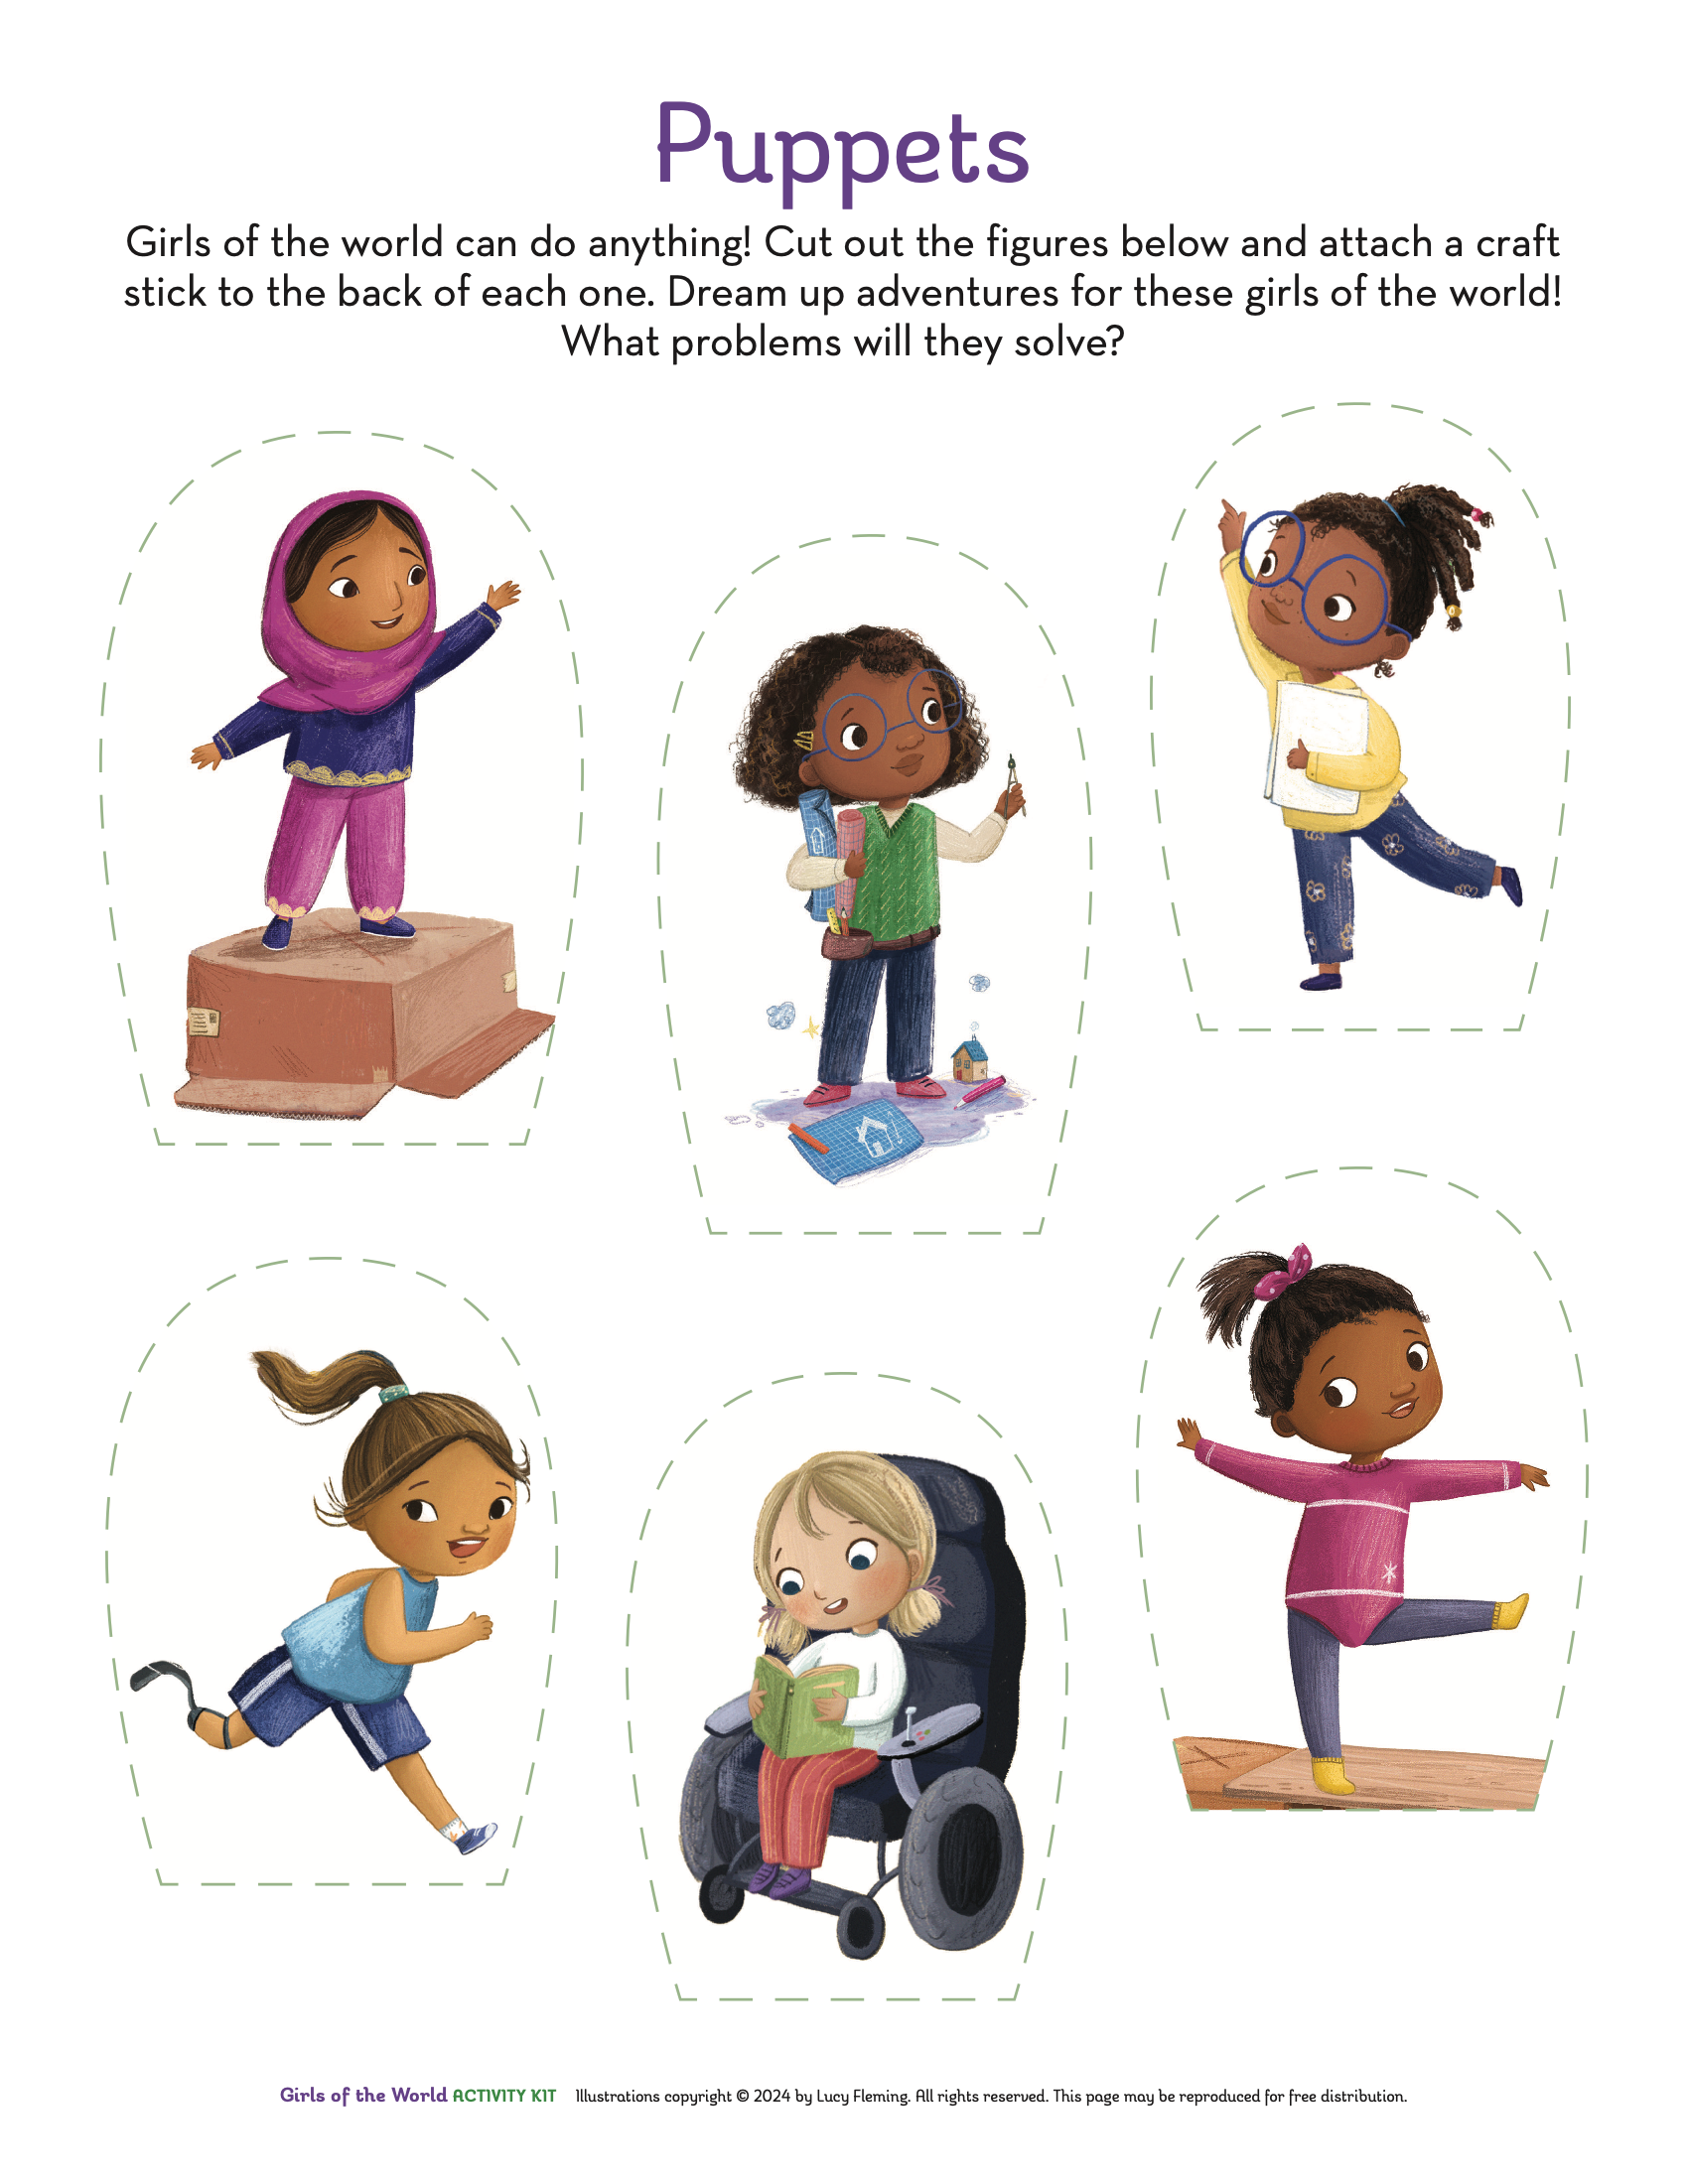 Girls of the World activity kit 4-4.png